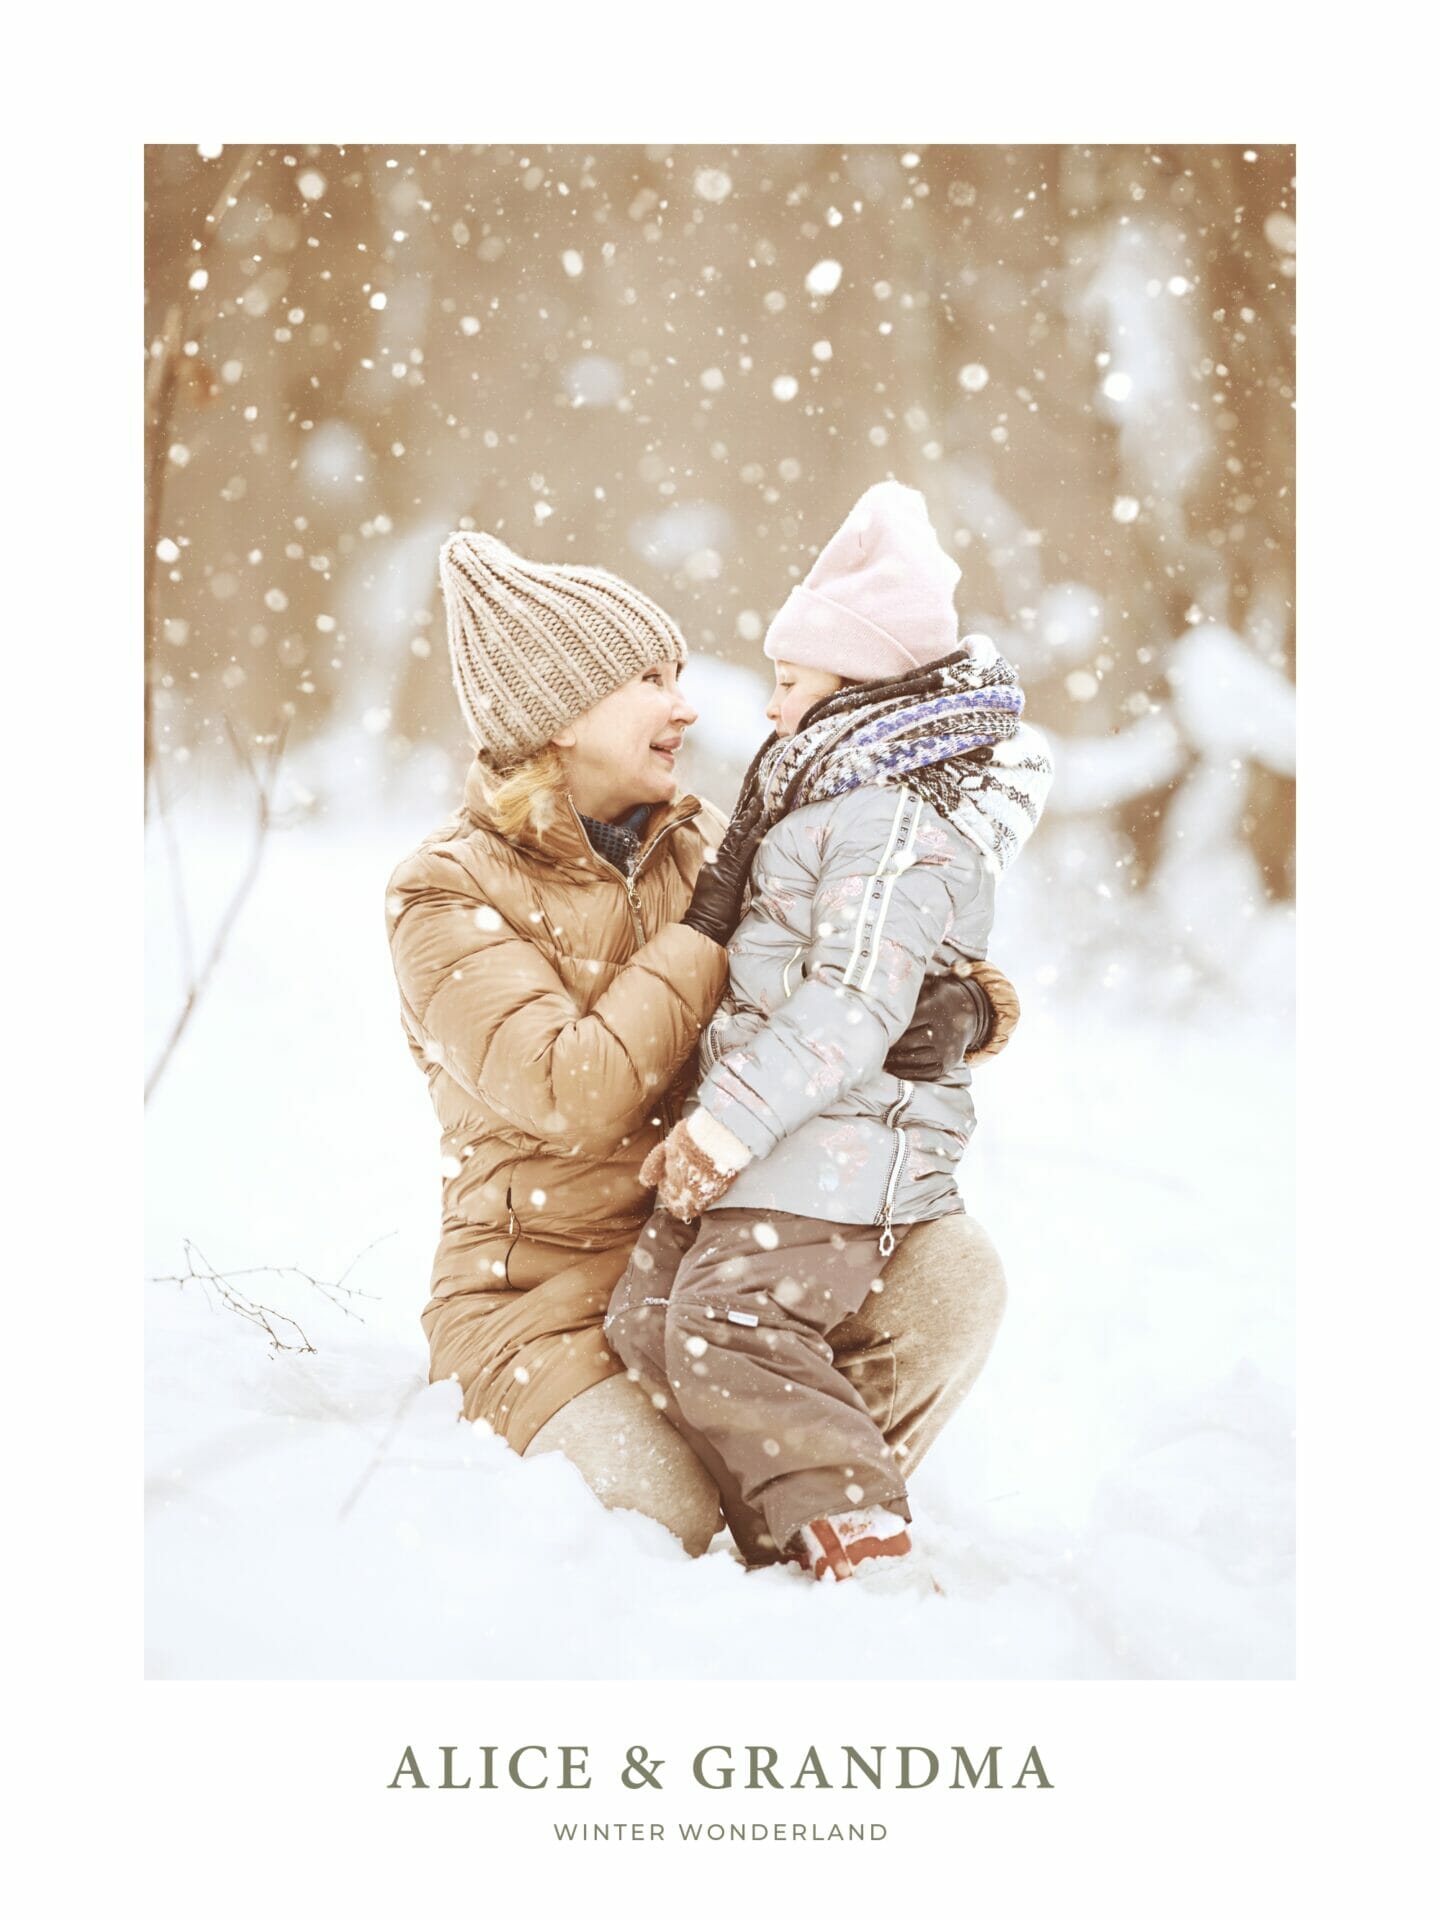 Poster of girl and grandma in snow